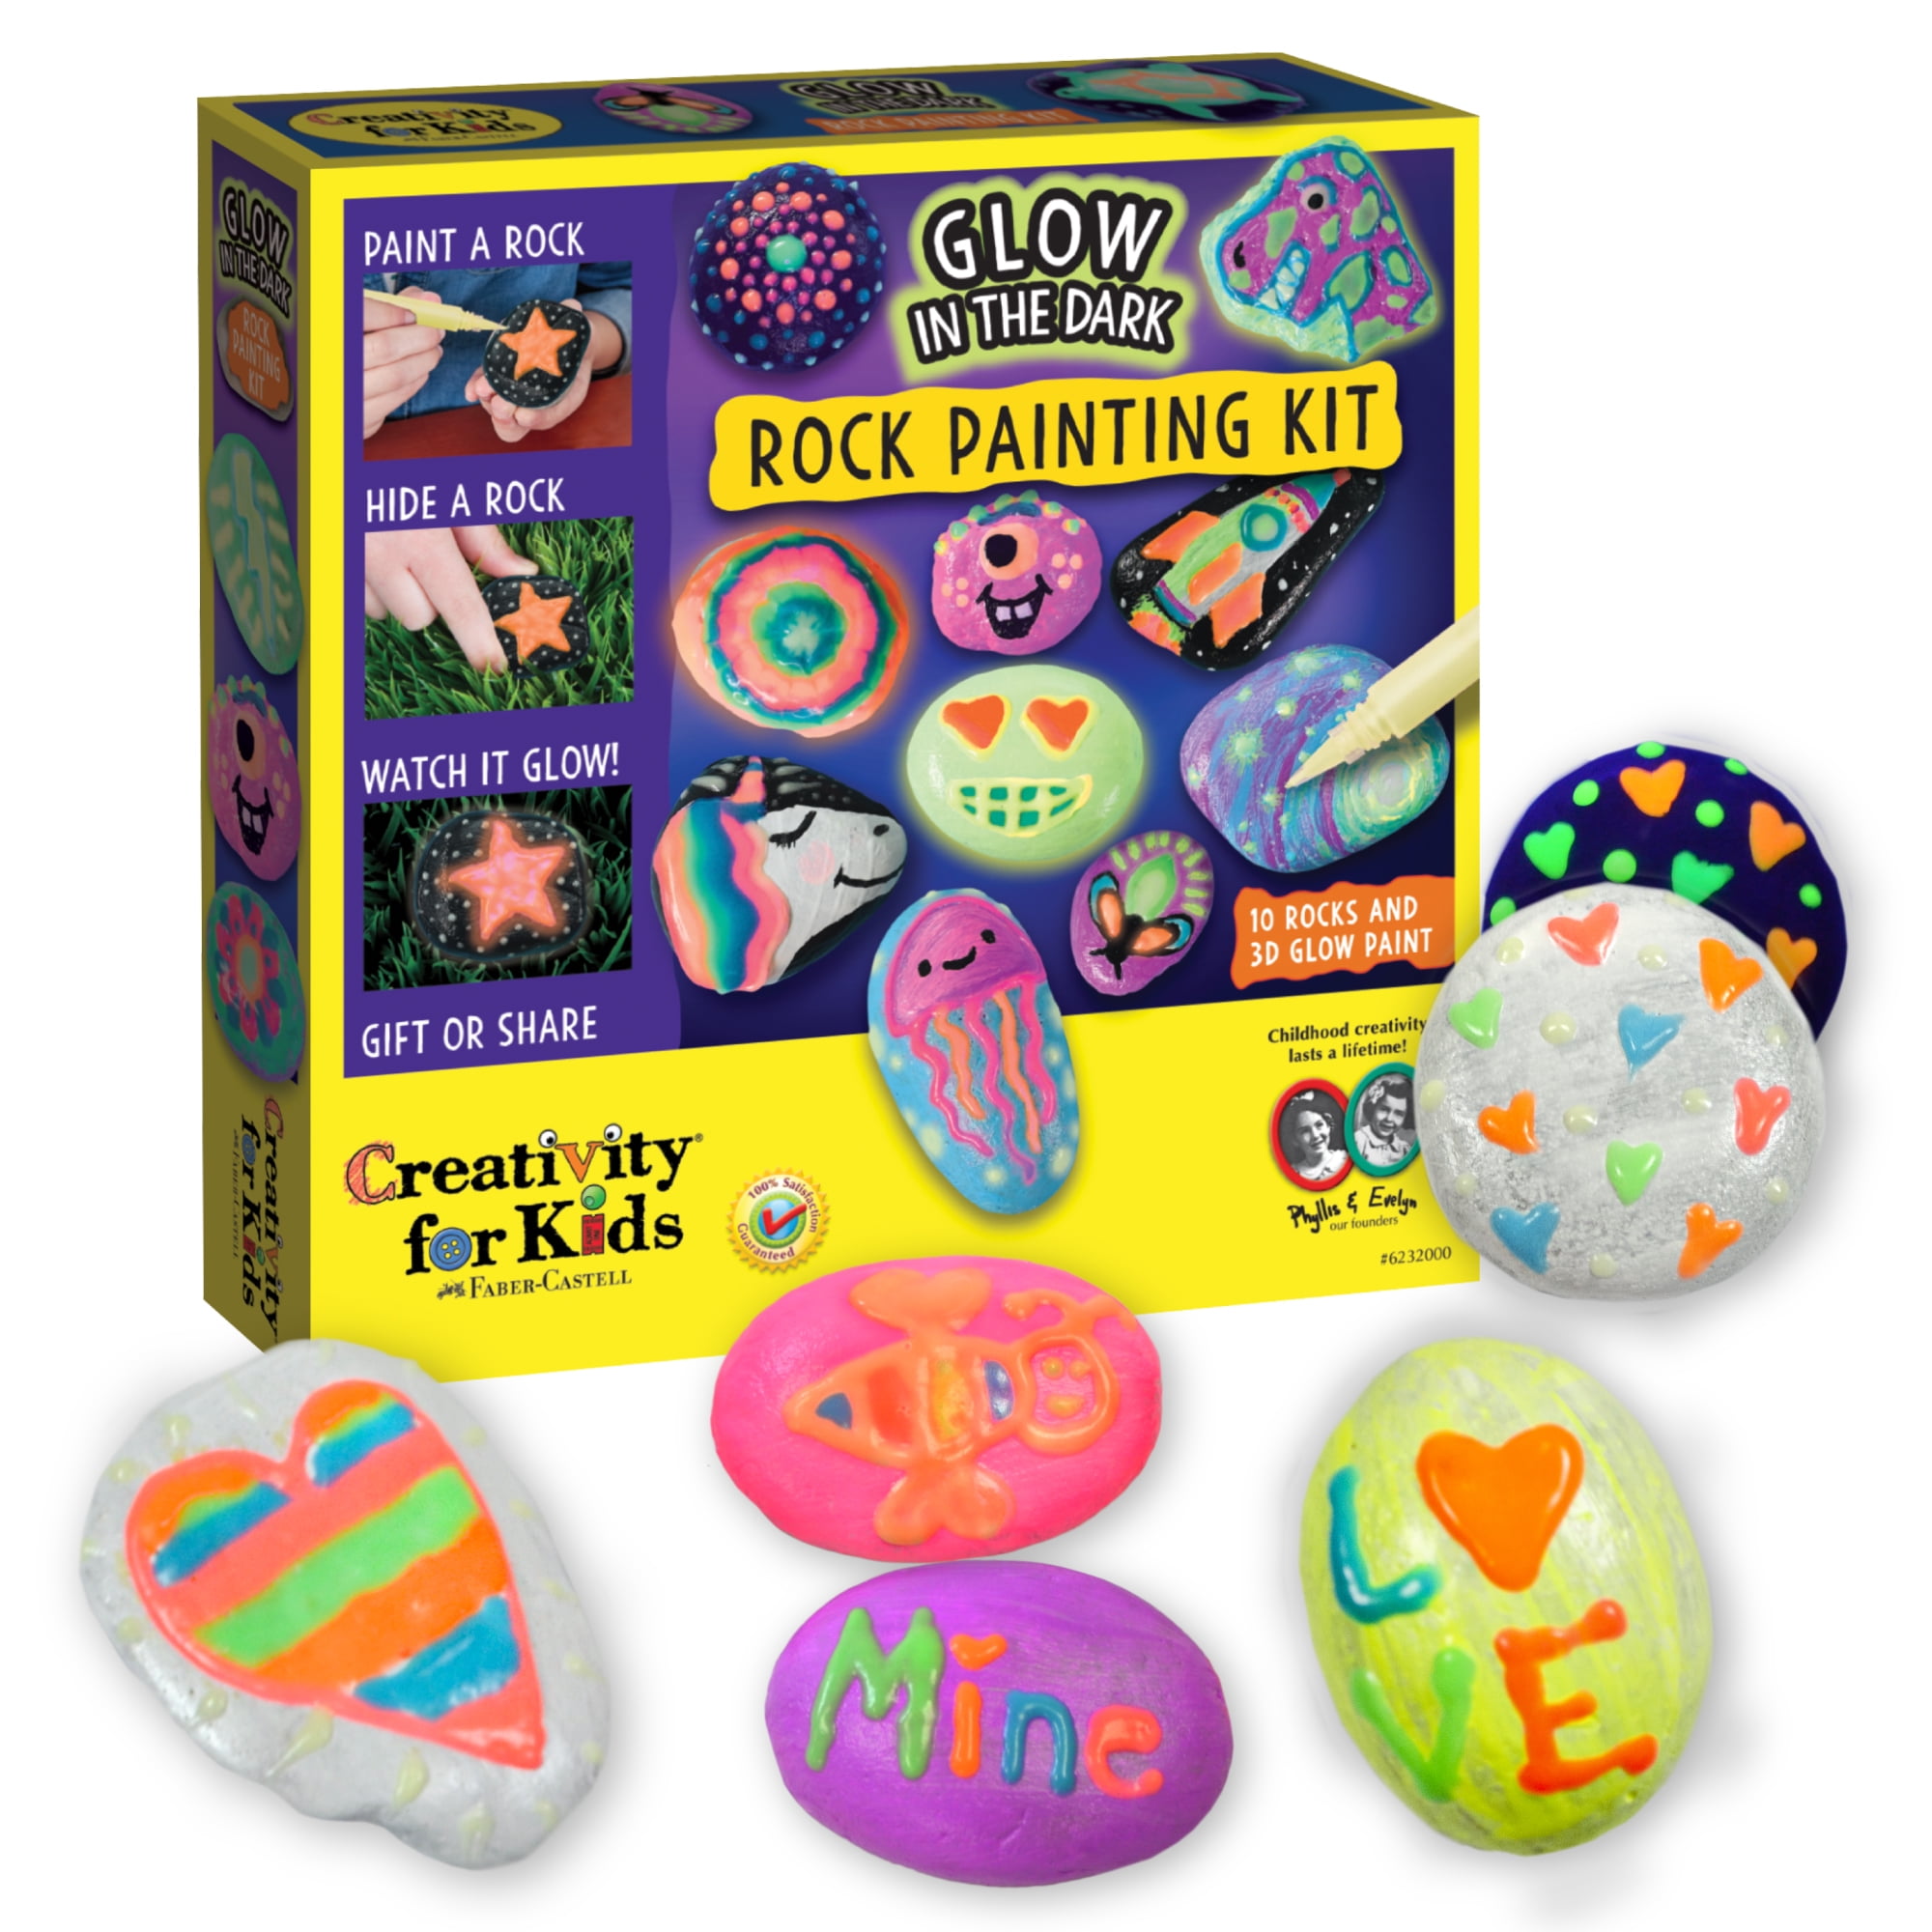 NATIONAL GEOGRAPHIC Glow in The Dark Rock Painting Kit - Crafts for Kids,  Decorate 15 River Rocks with 15 Paint Colors & Art Supplies